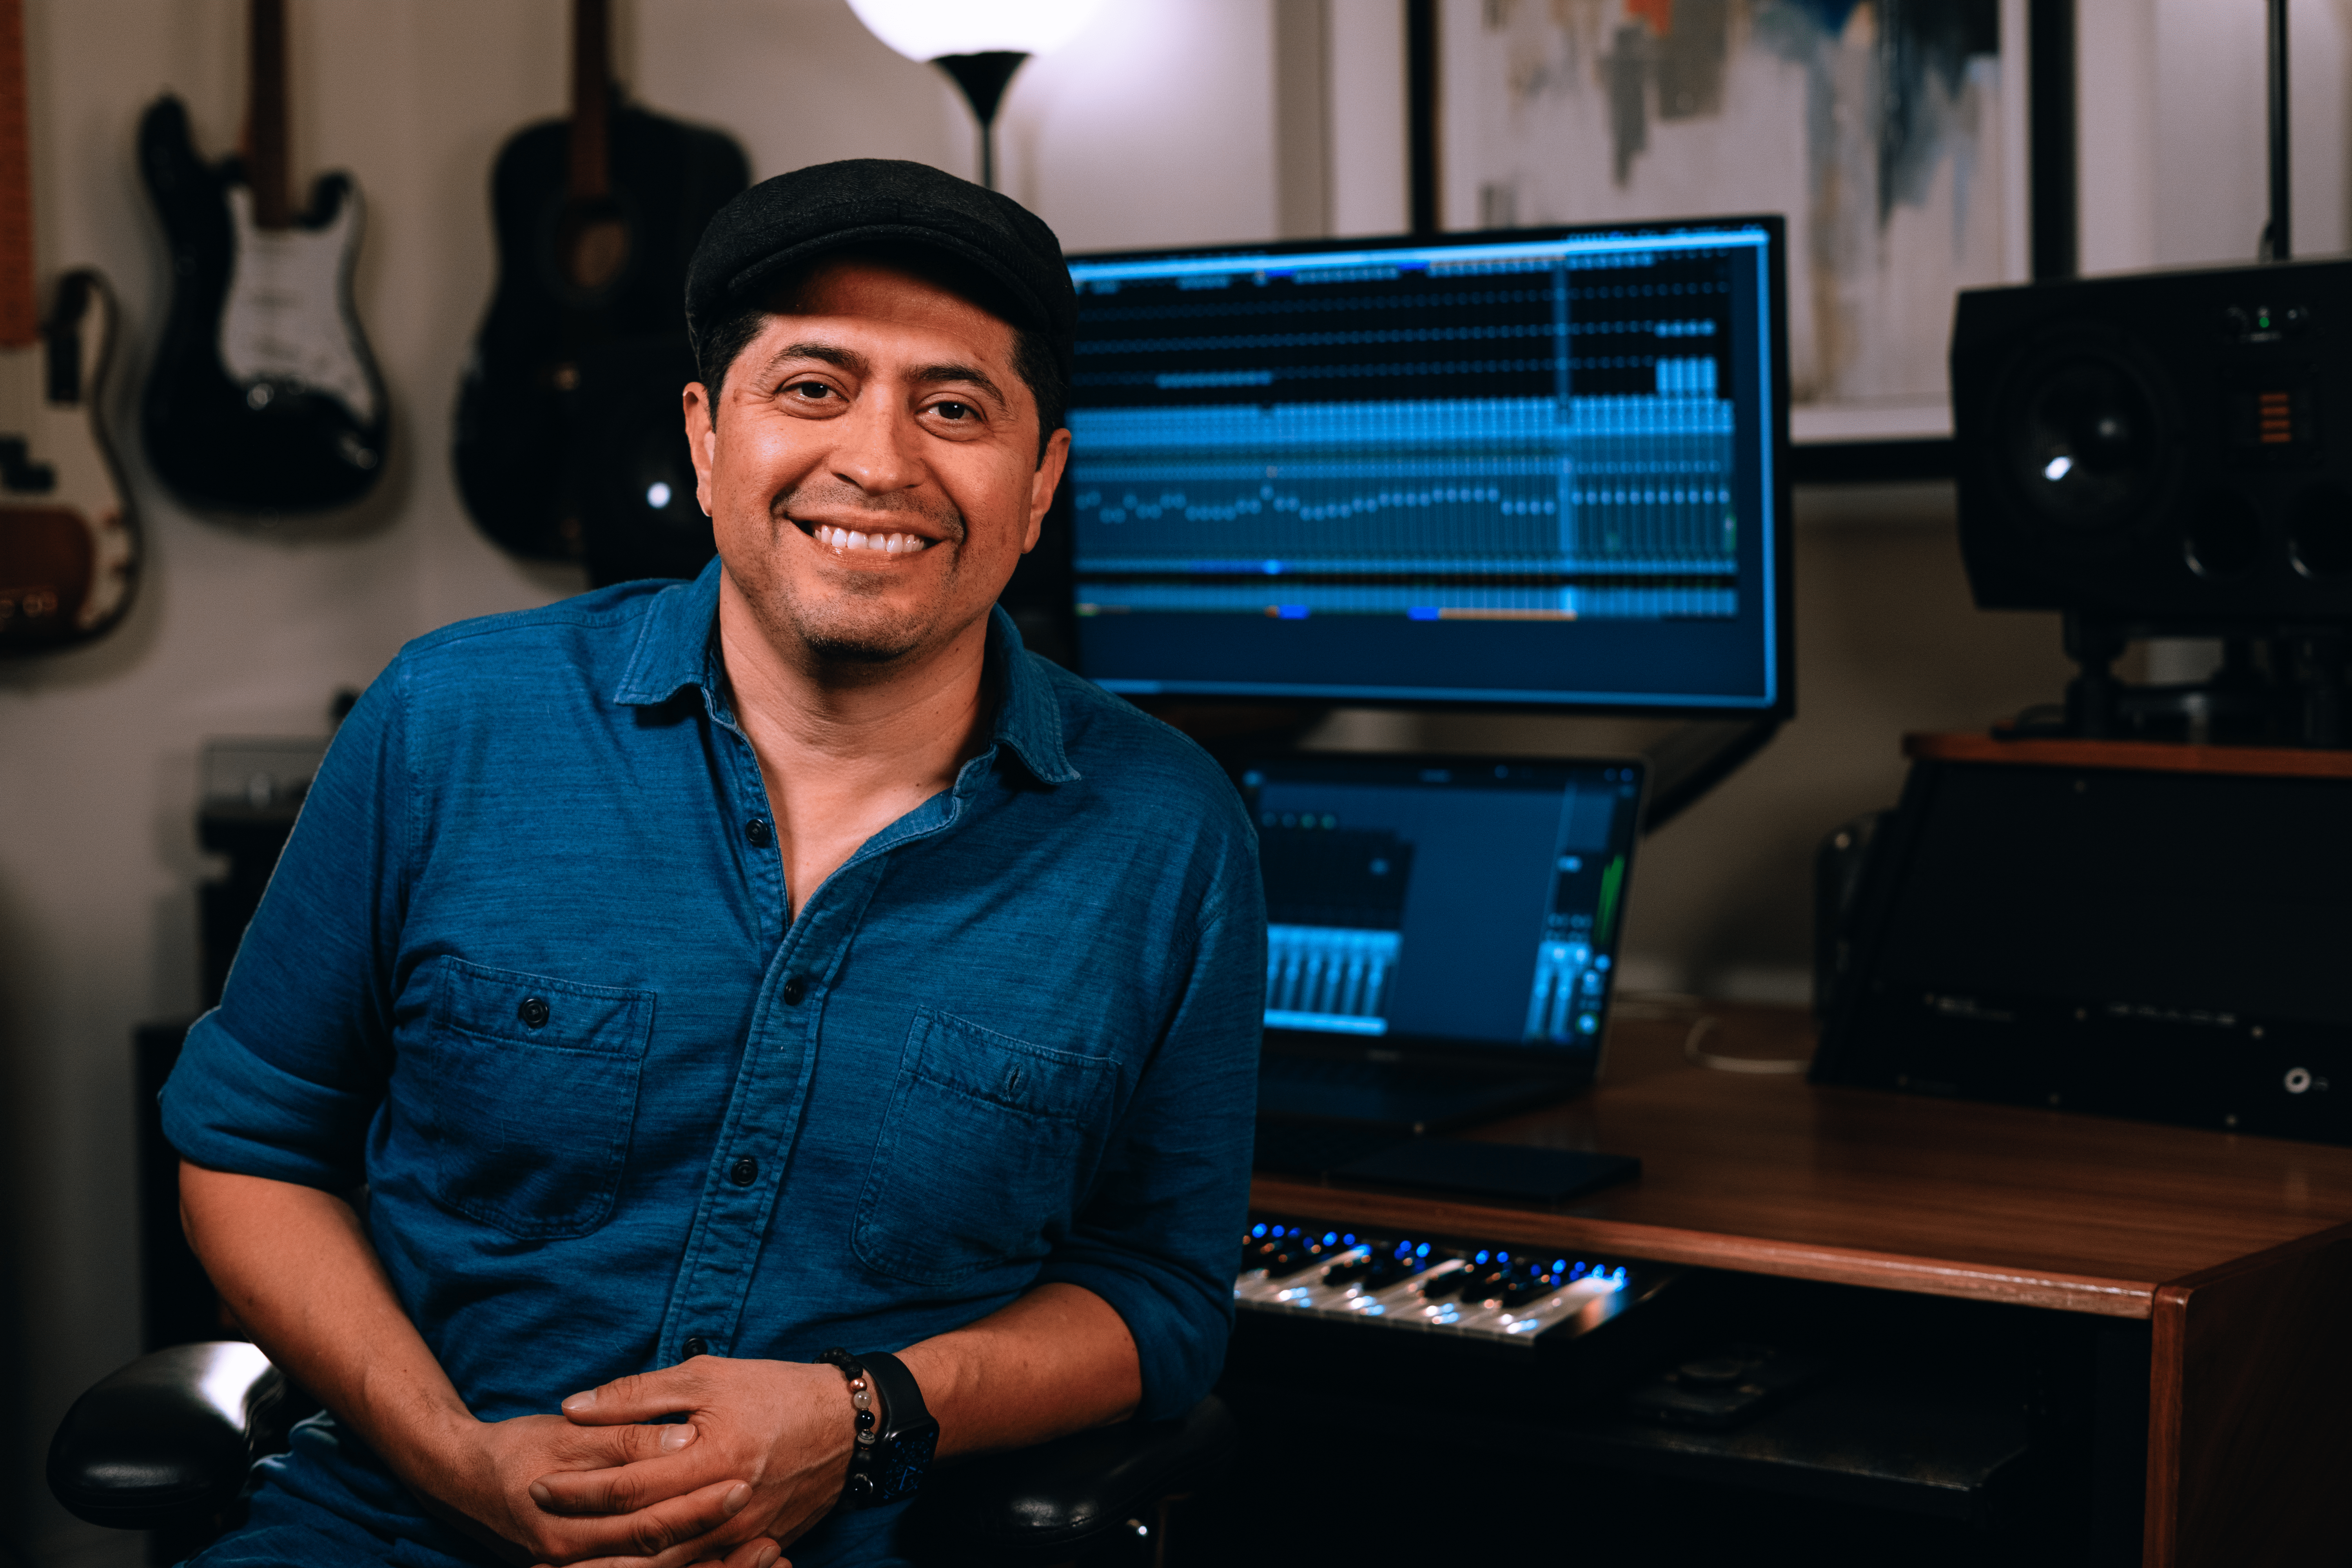 Songwriter, producer and engineer Miguel Soltero smiles as he sits in his studio with guitars in the background.